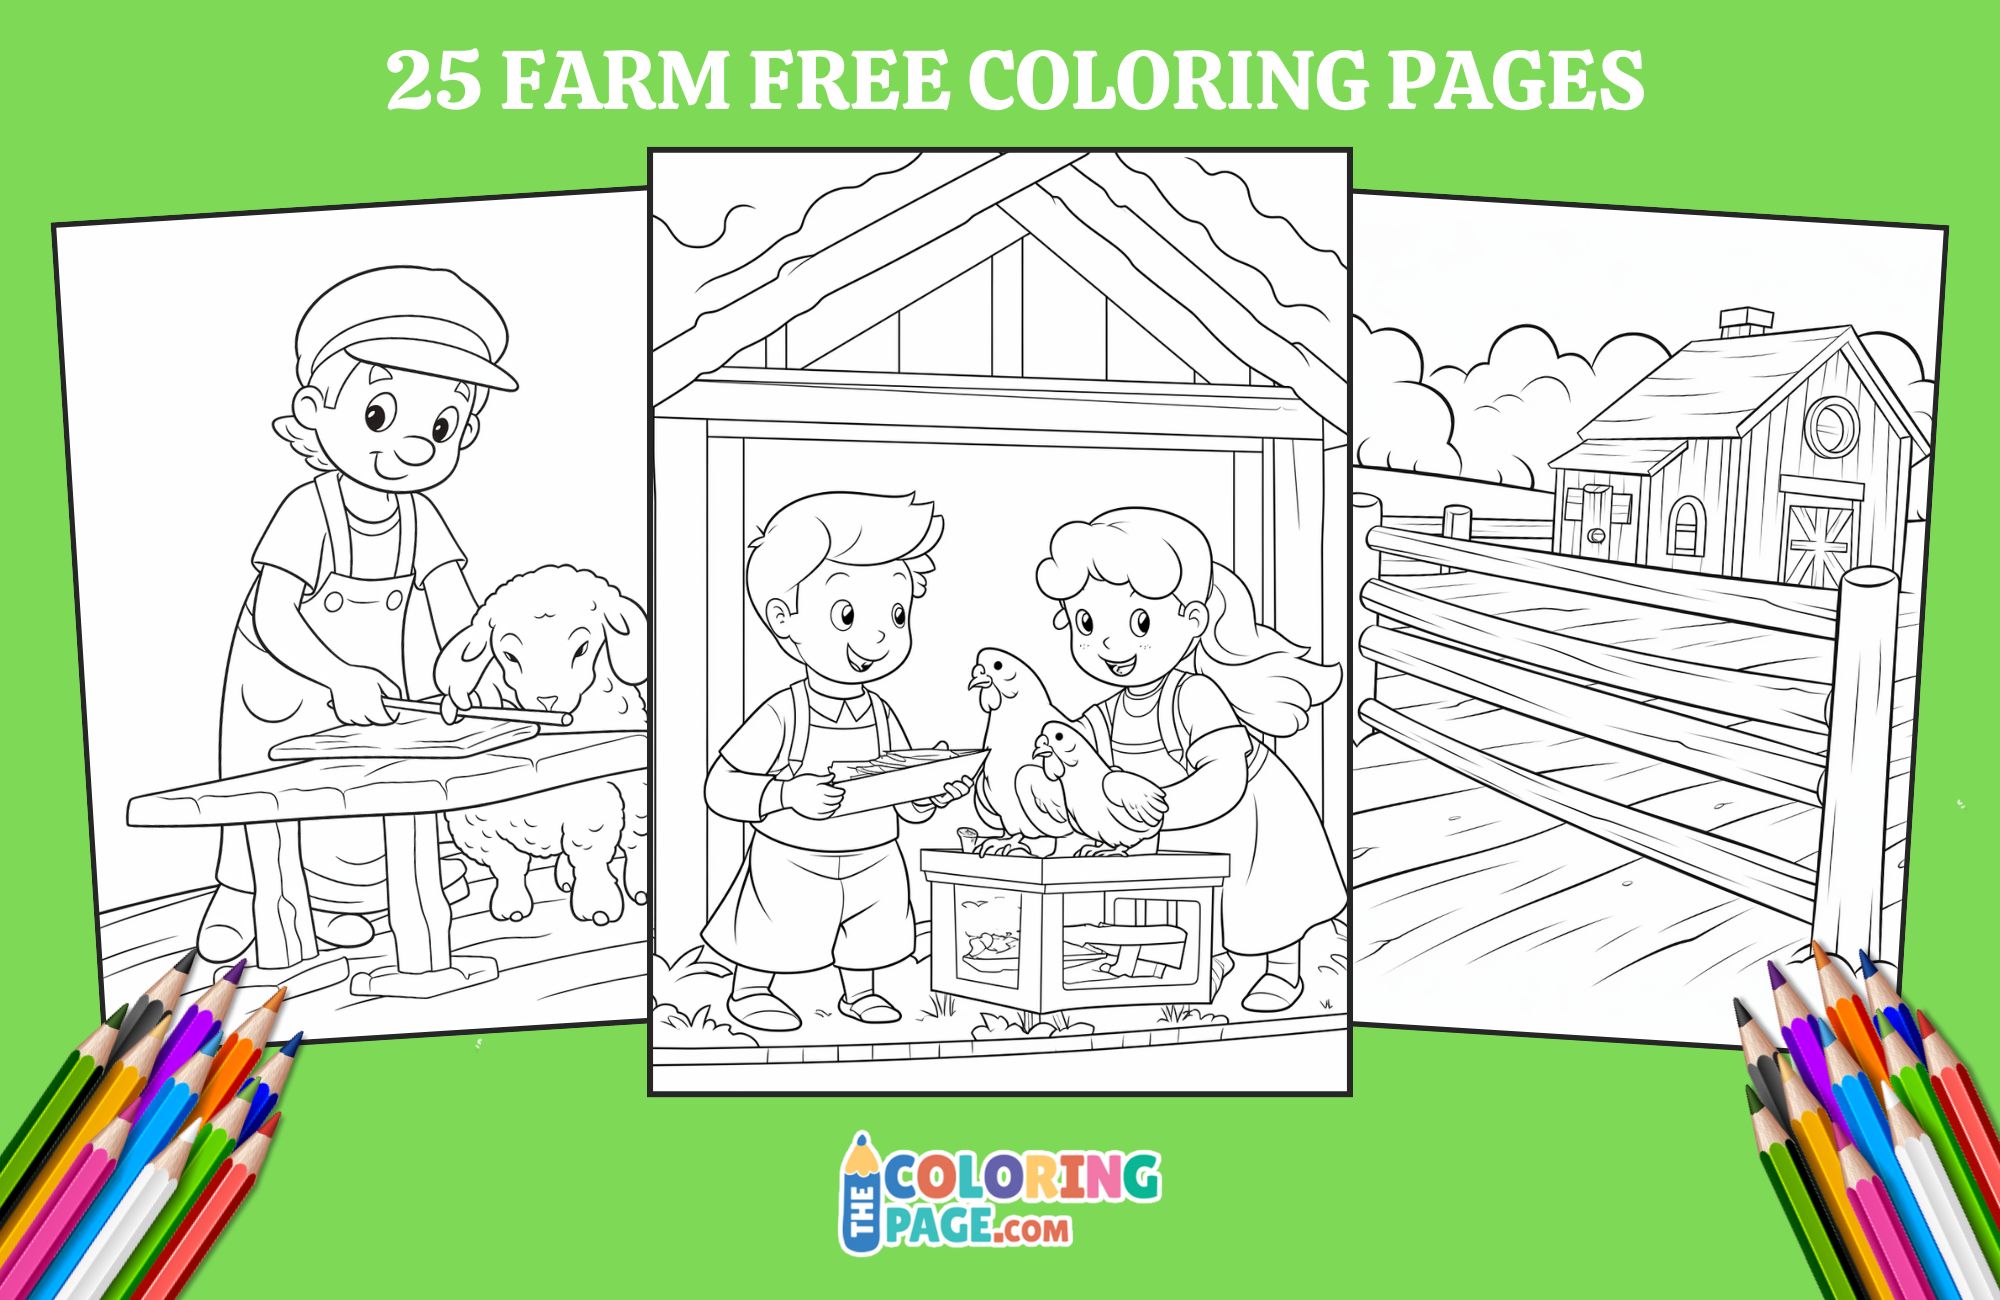 25 Farm Coloring Pages for kids